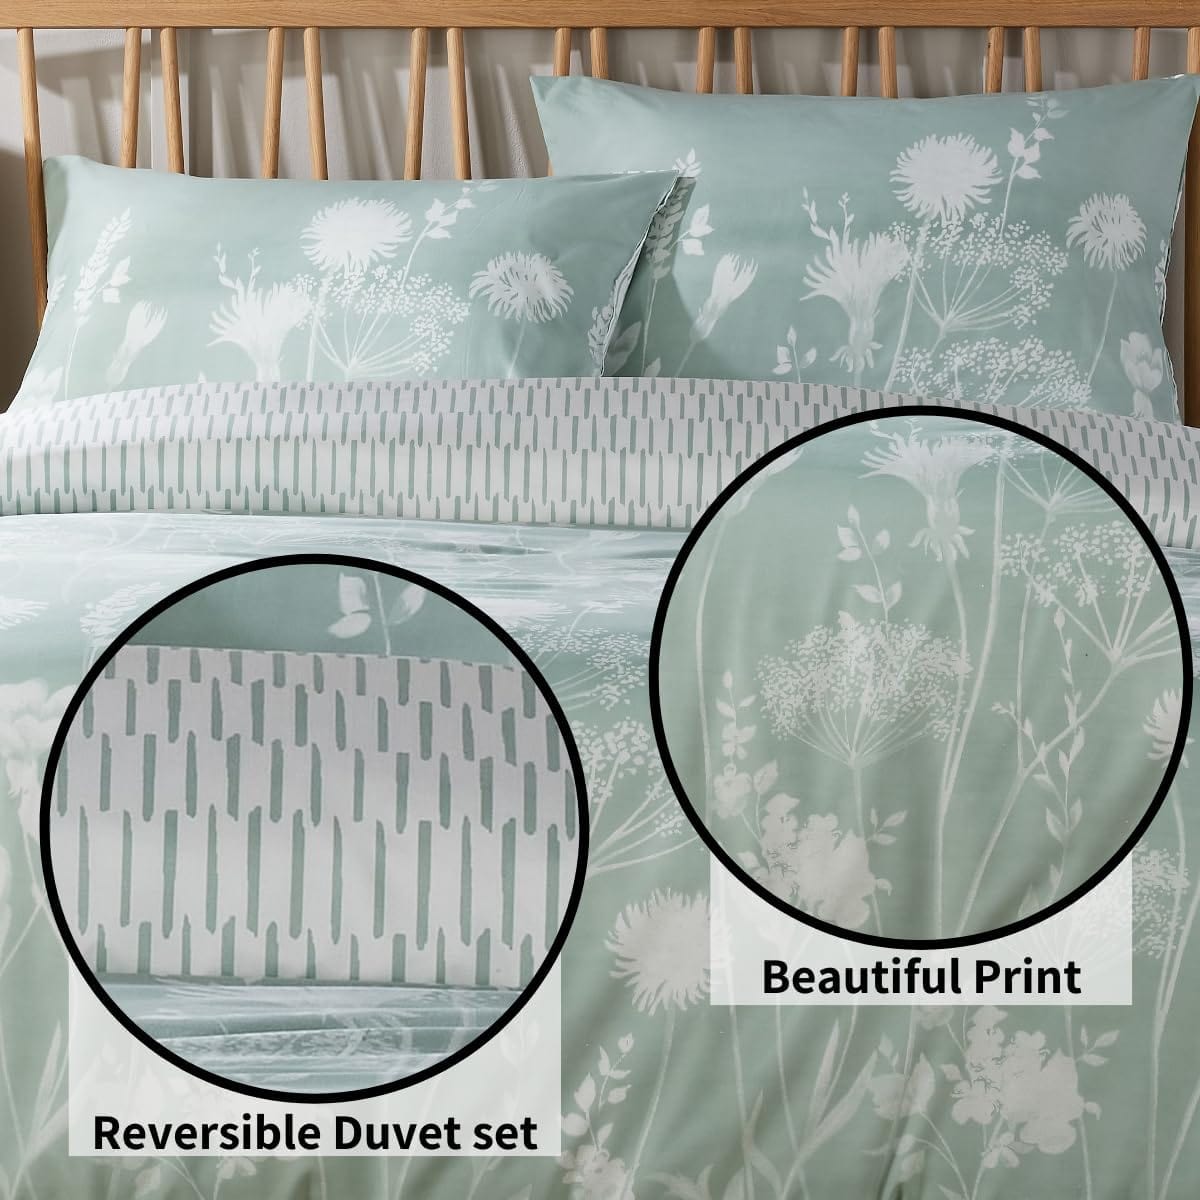 Meadow Sage Green Printed Duvet Cover Set OLIVIA ROCCO Duvet Covers